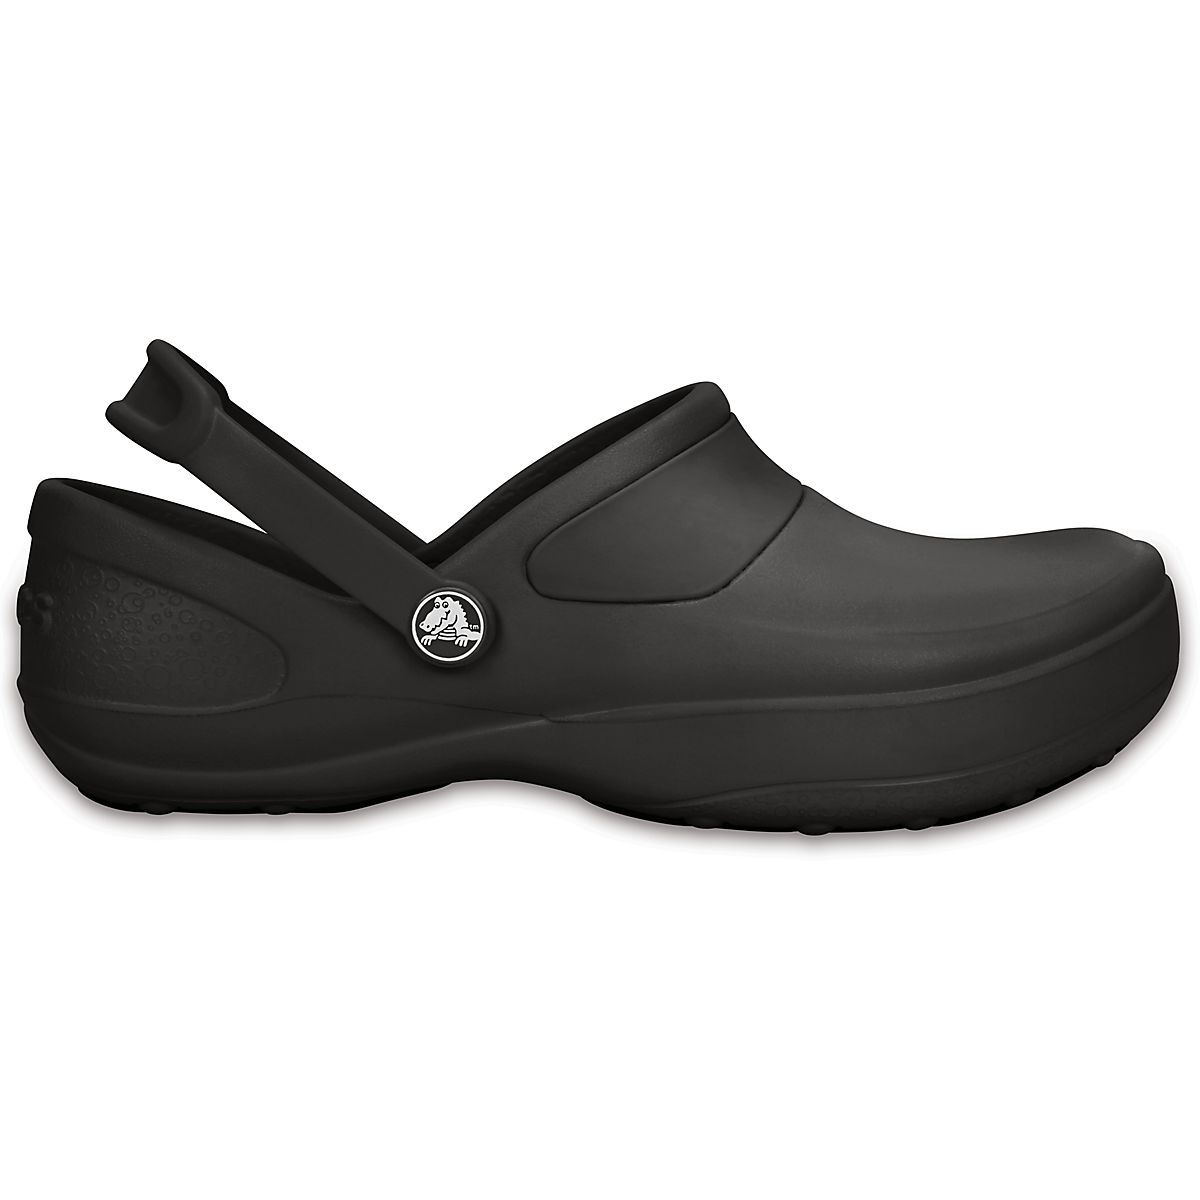 Crocs Women's Mercy Work Clogs | Free Shipping at Academy